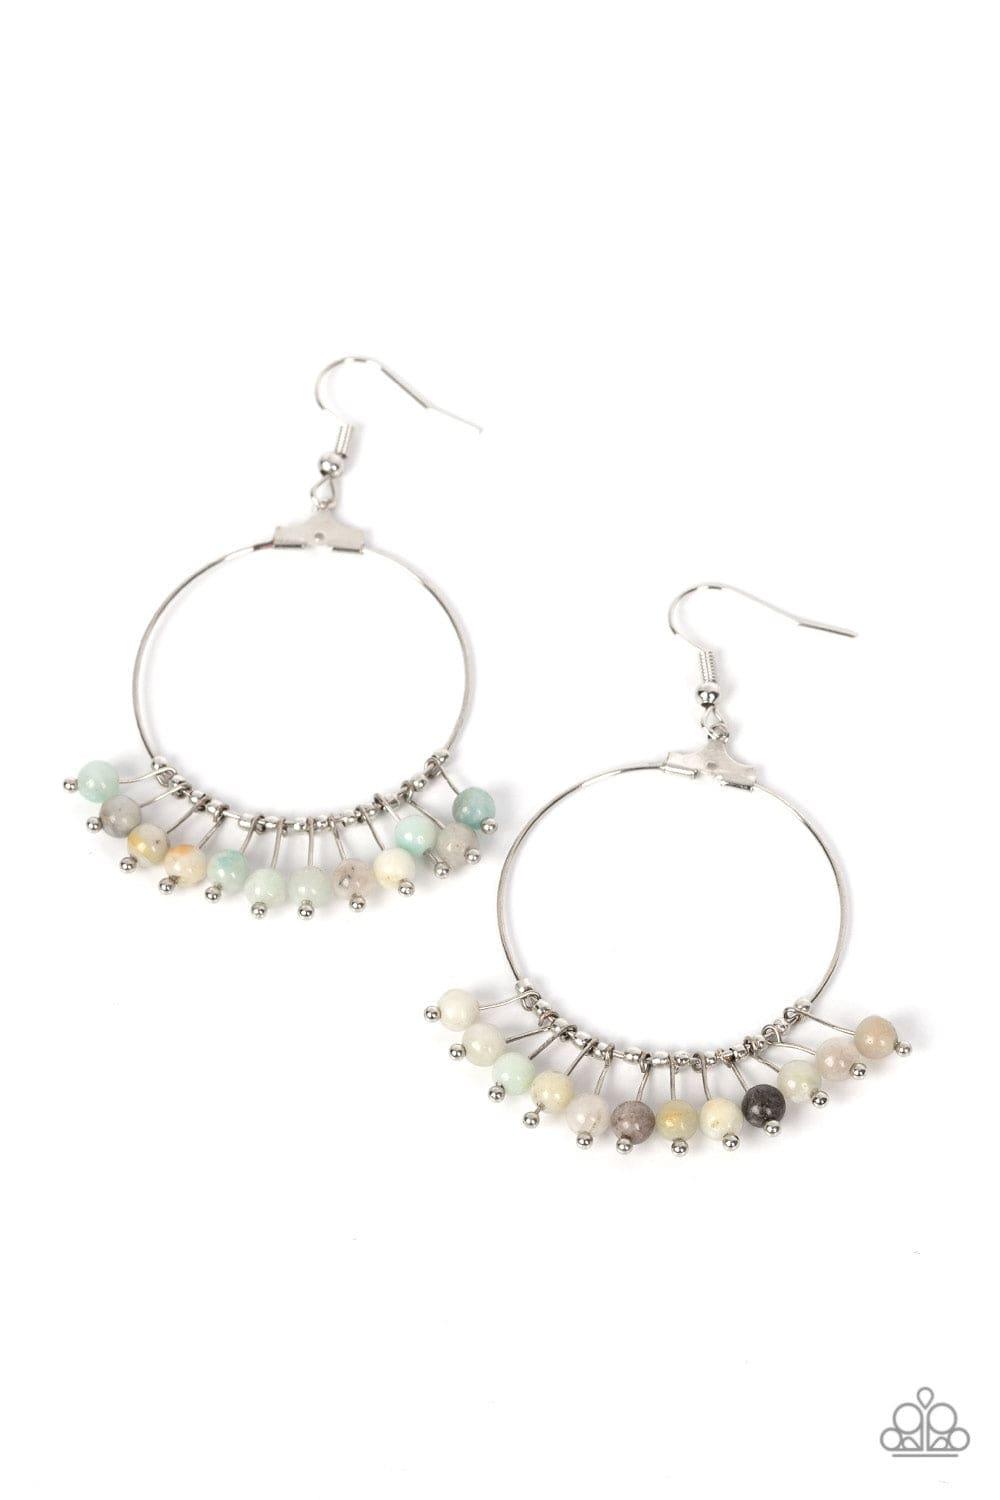 Paparazzi Accessories - Free Your Soul - Multicolor Earrings - Bling by JessieK